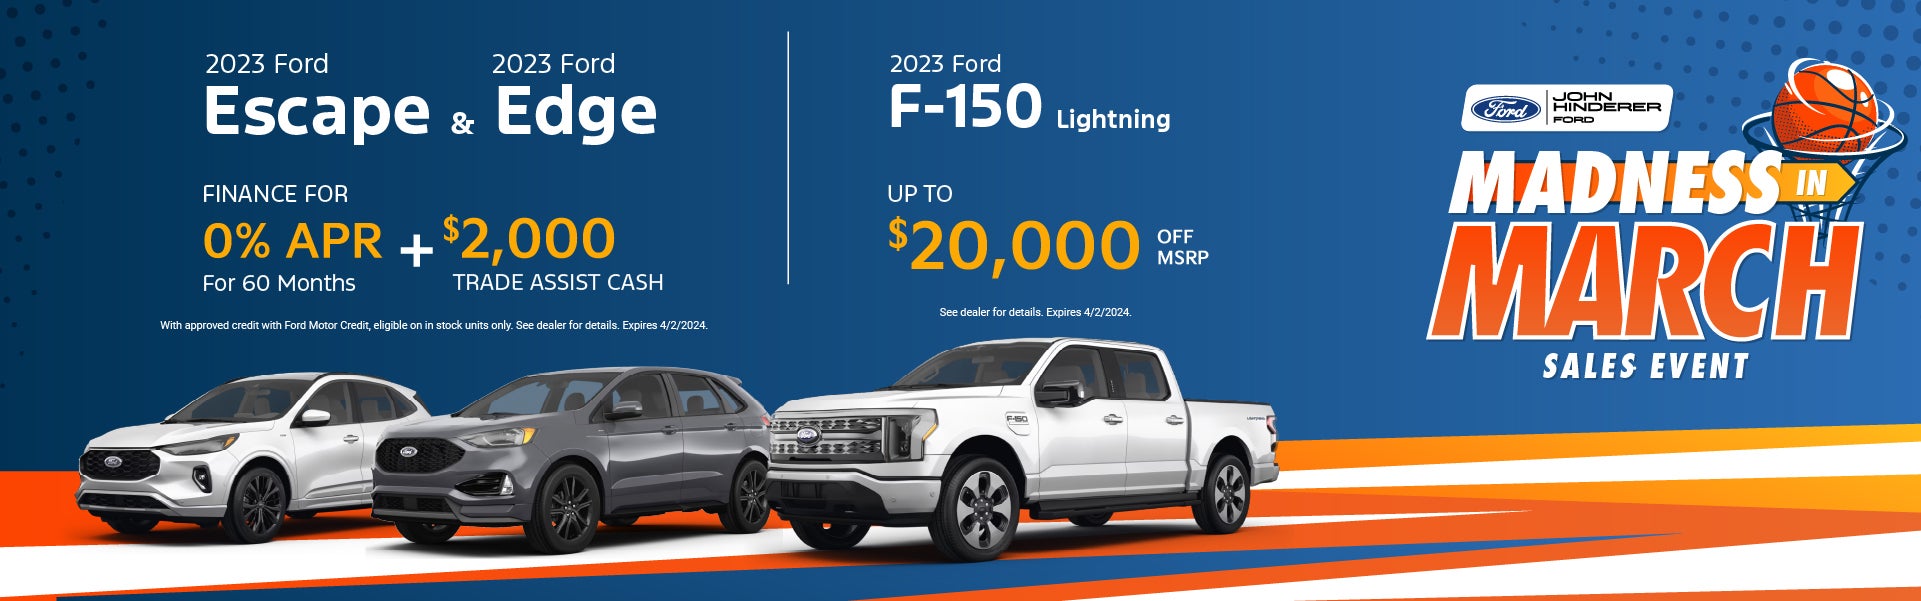 Savings on Escapes, Edges, and F-150 Lightnings